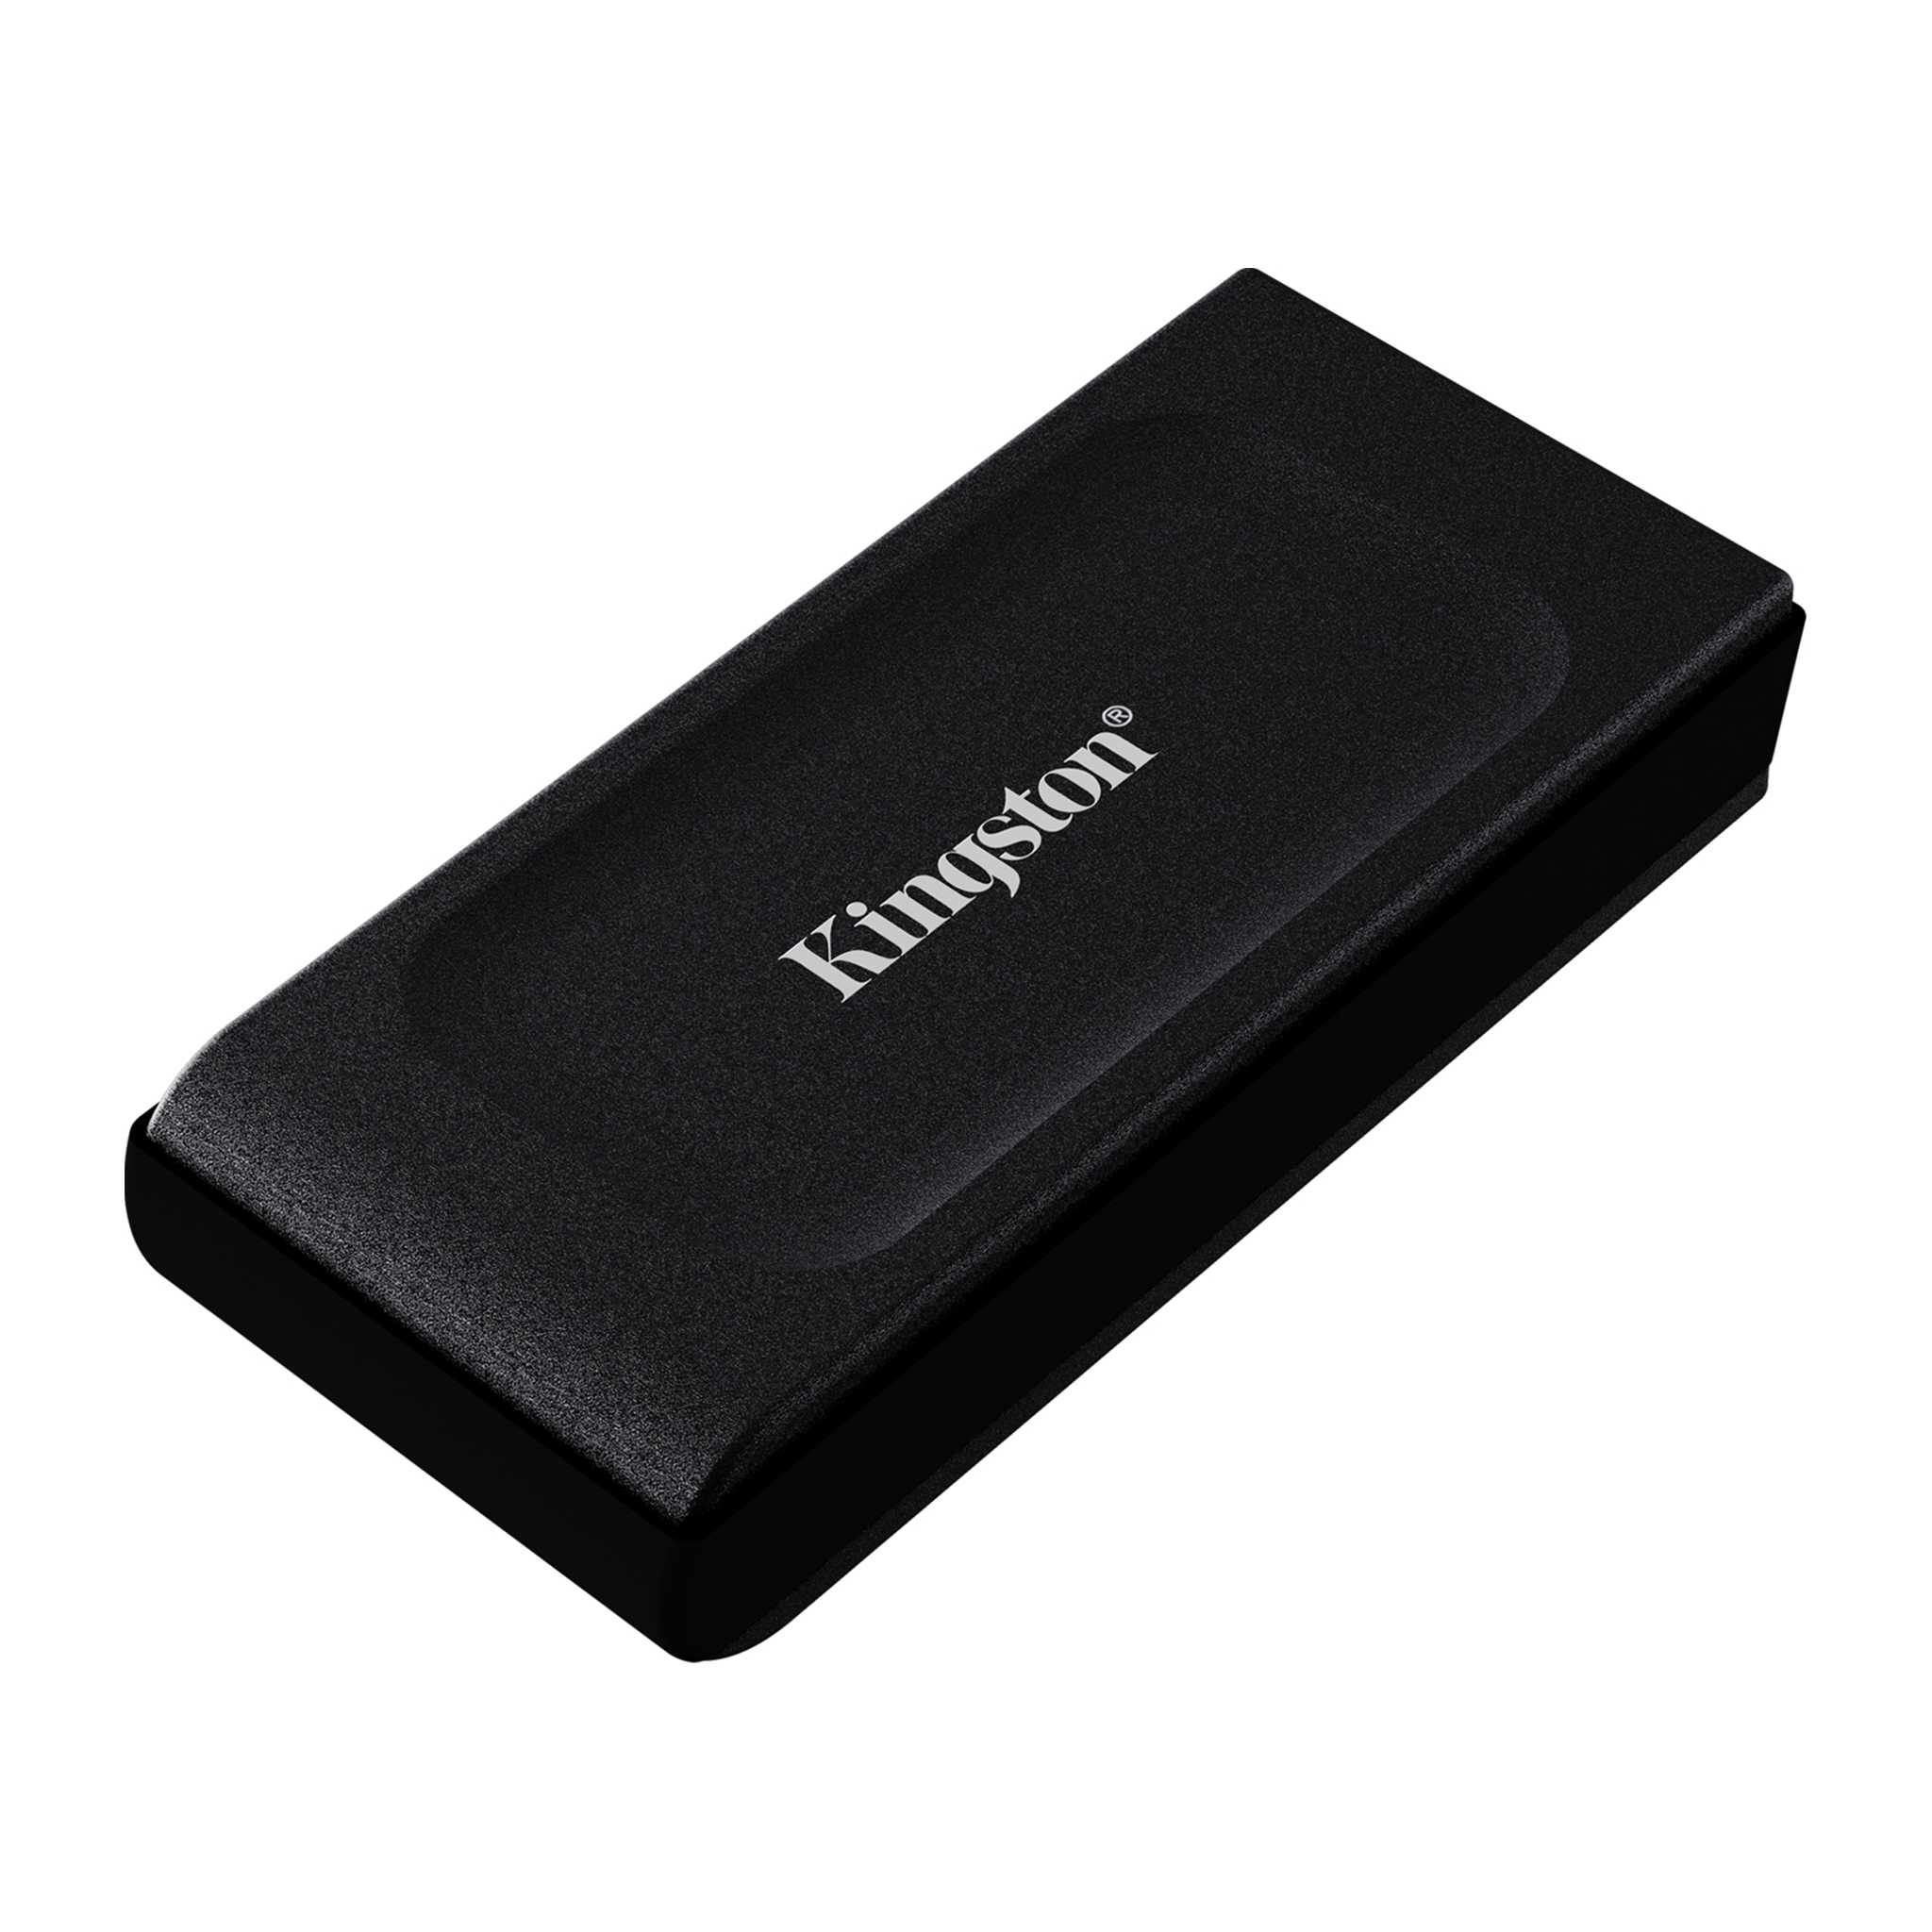 XS1000 External Solid State Drive (SSD), angle